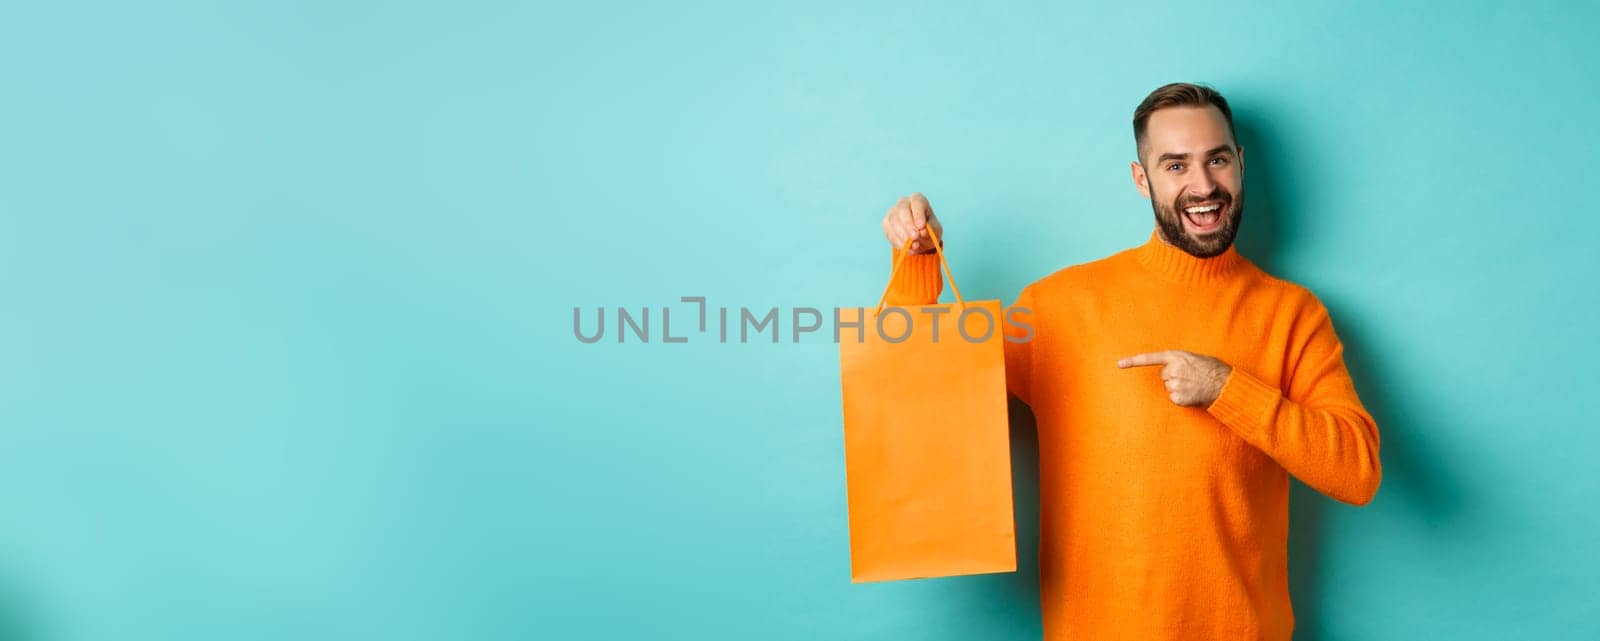 Satisfied male customer pointing at orange shopping bag, recommending store, smiling pleased, standing over turquoise background.